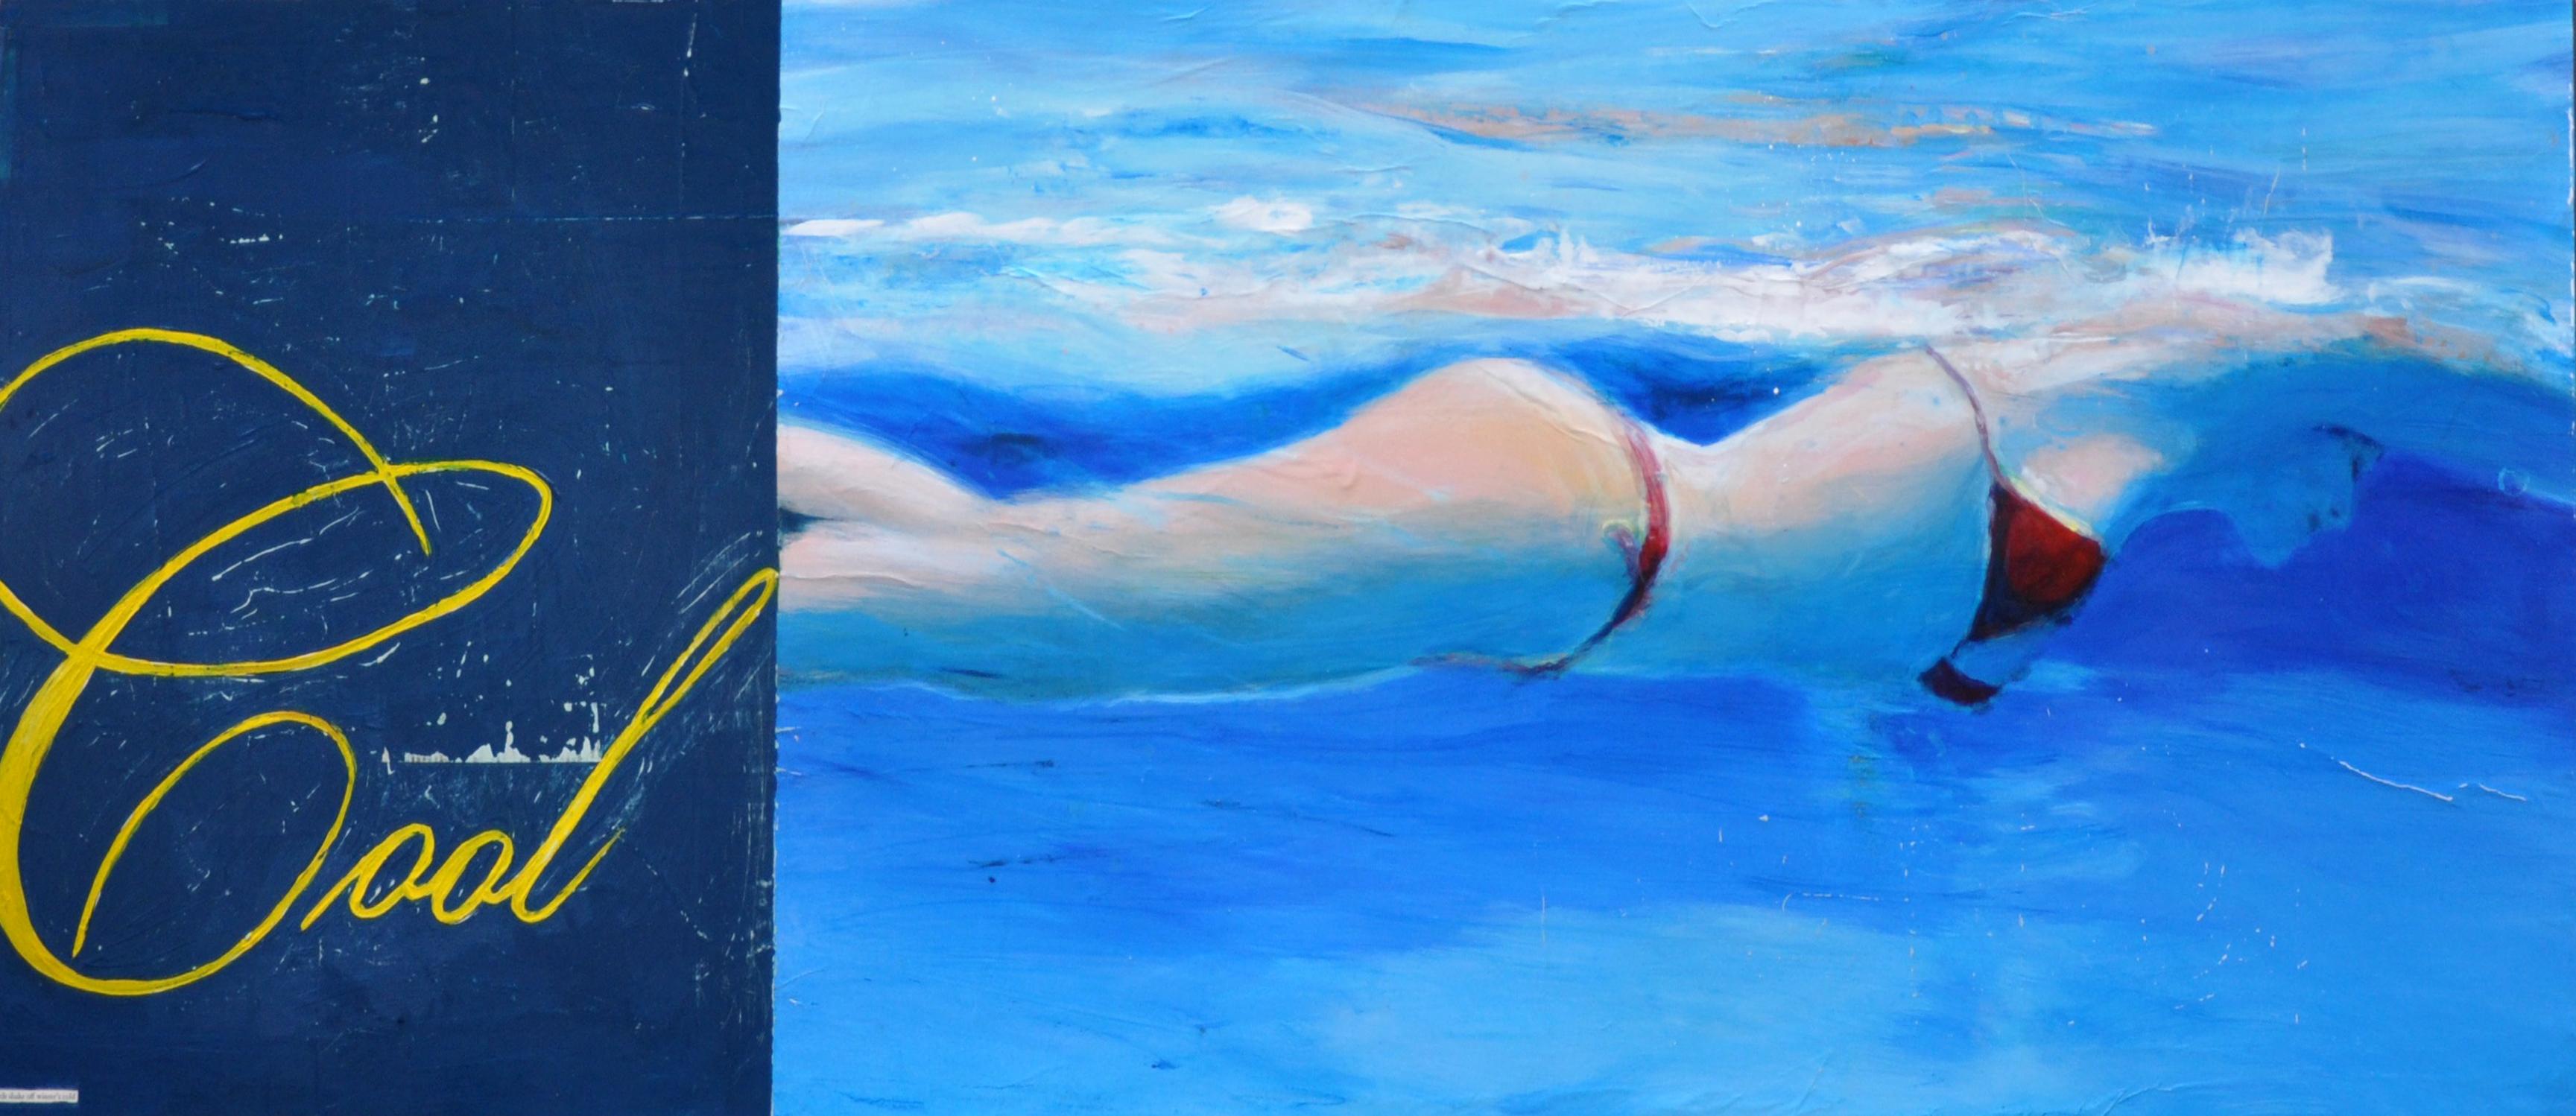 Cool_2021_Greg Miller_Acrylic/Collage/Panel_Figurative/Swimmer/Waterscape